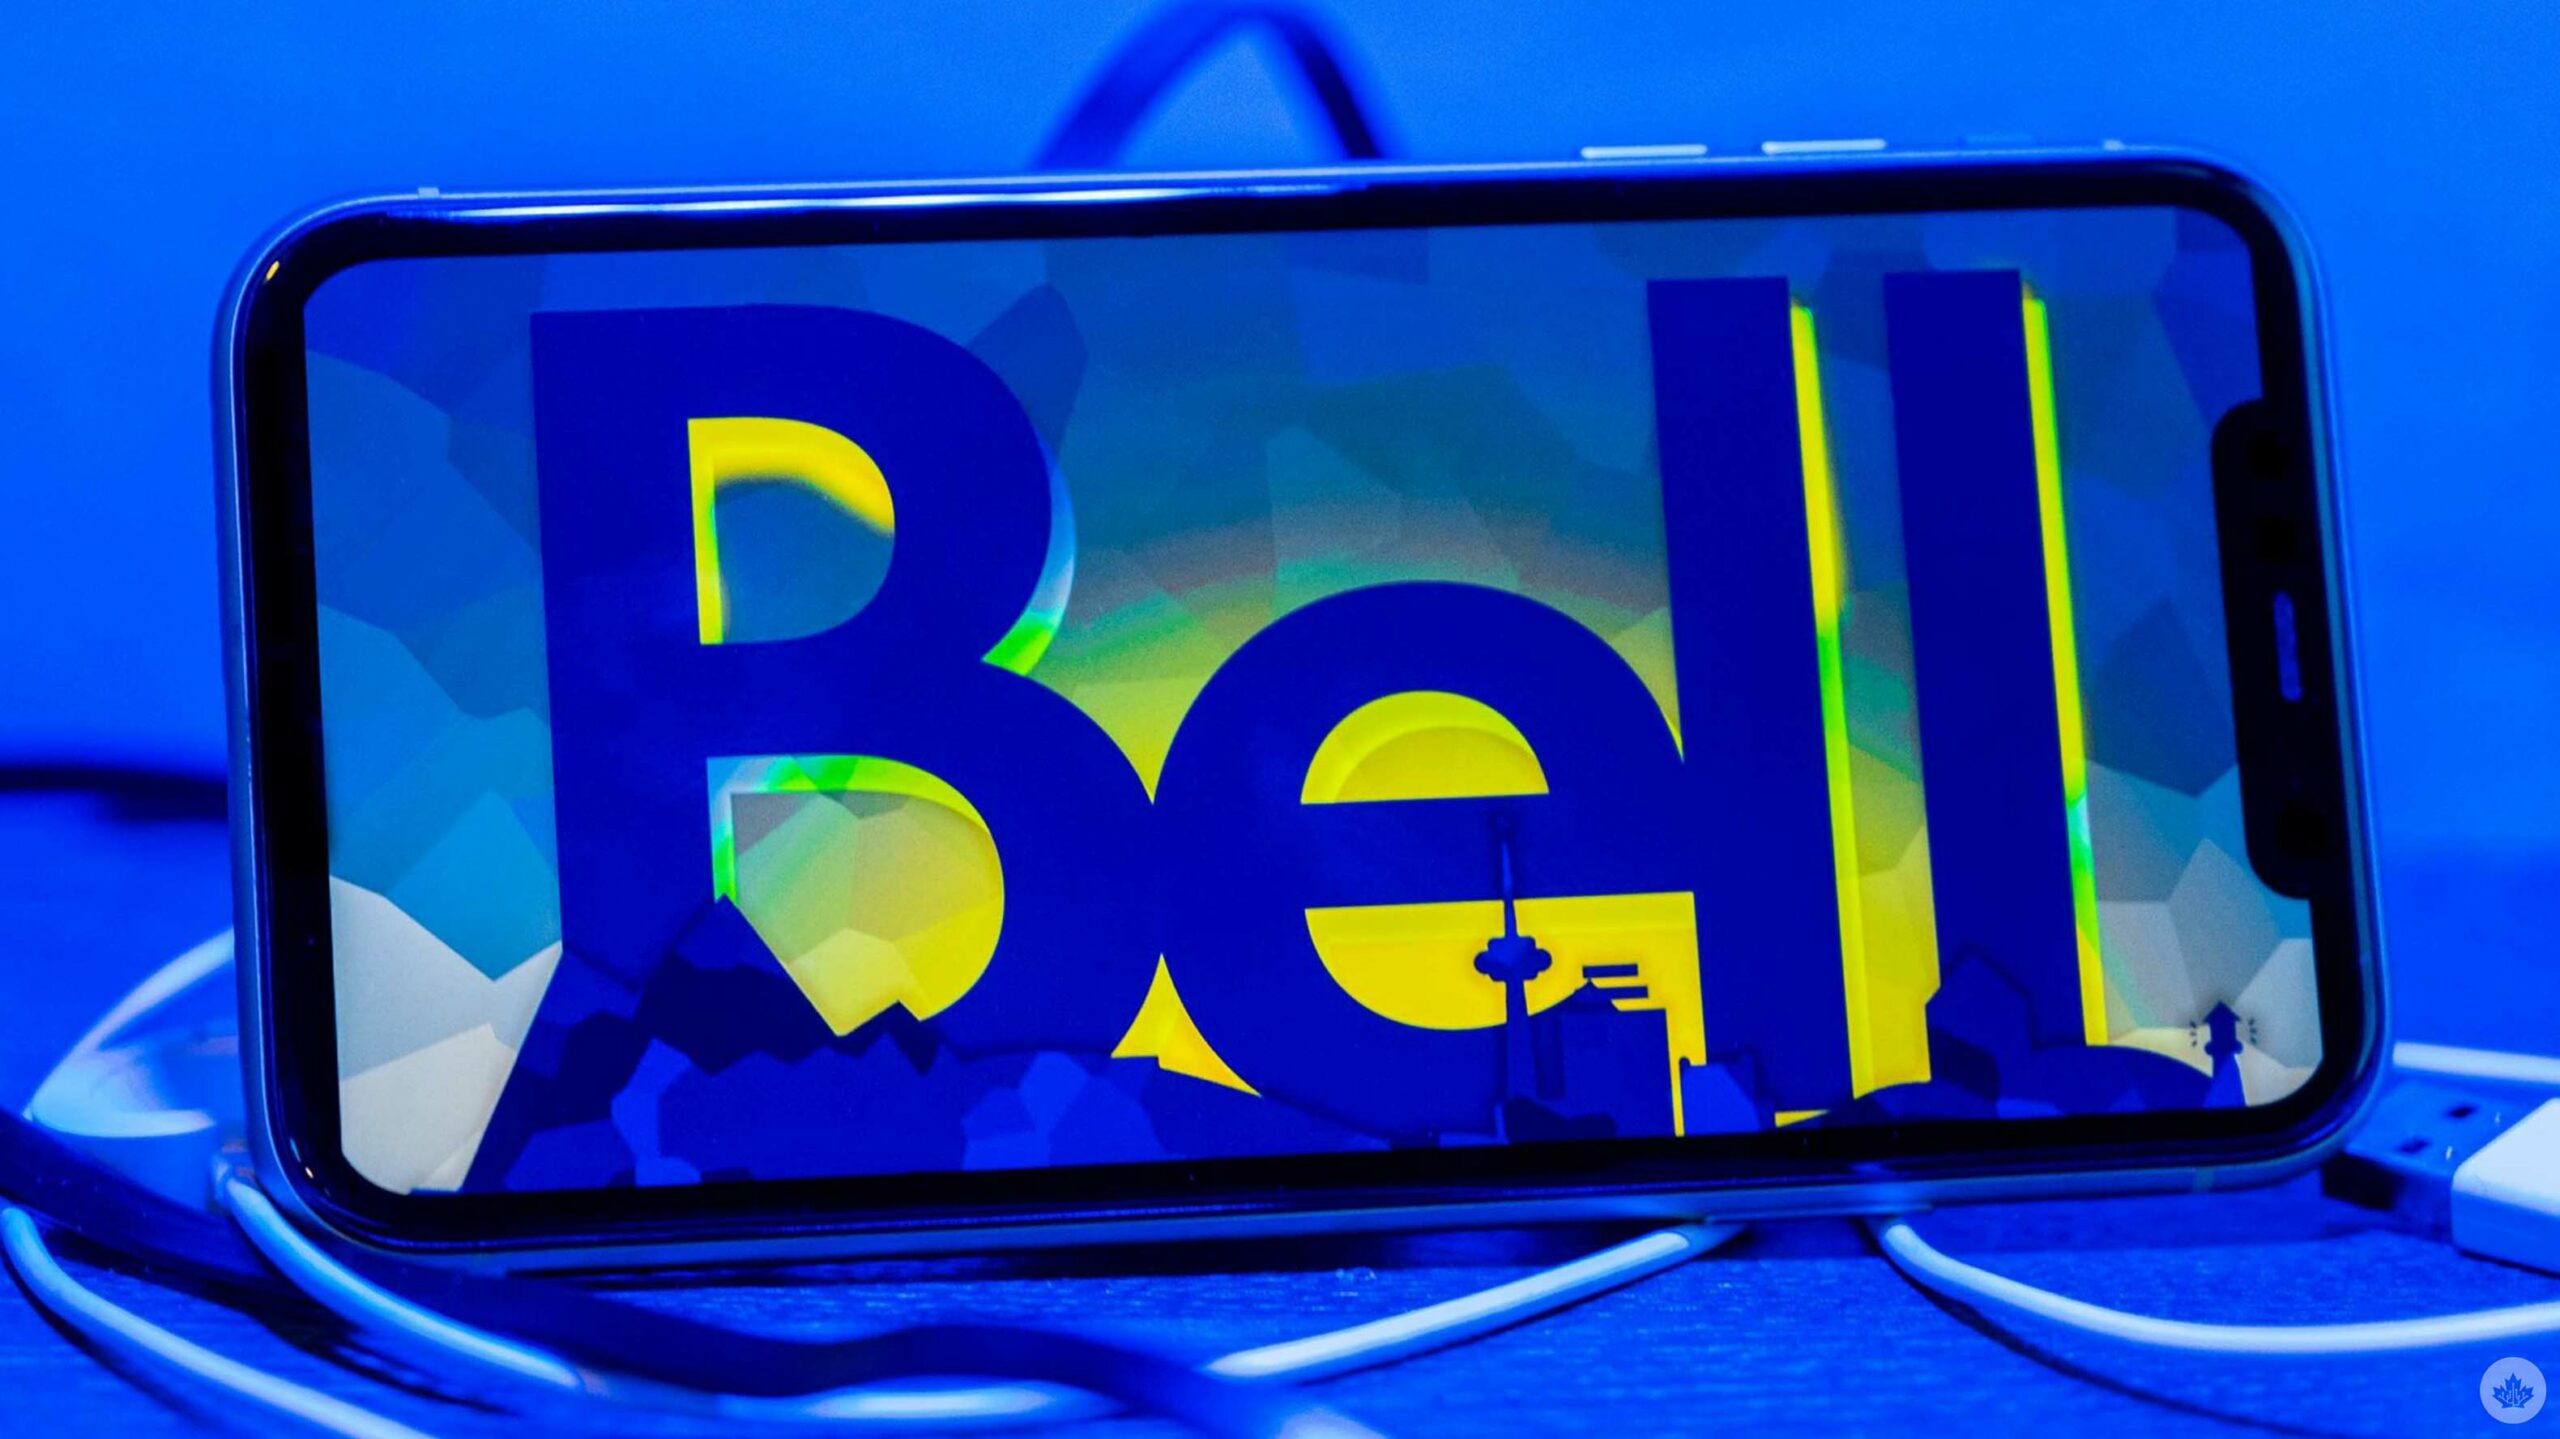 Bell drops 45GB plan price by $5/mo, adds 15GB shareable data bonus to $85 plan